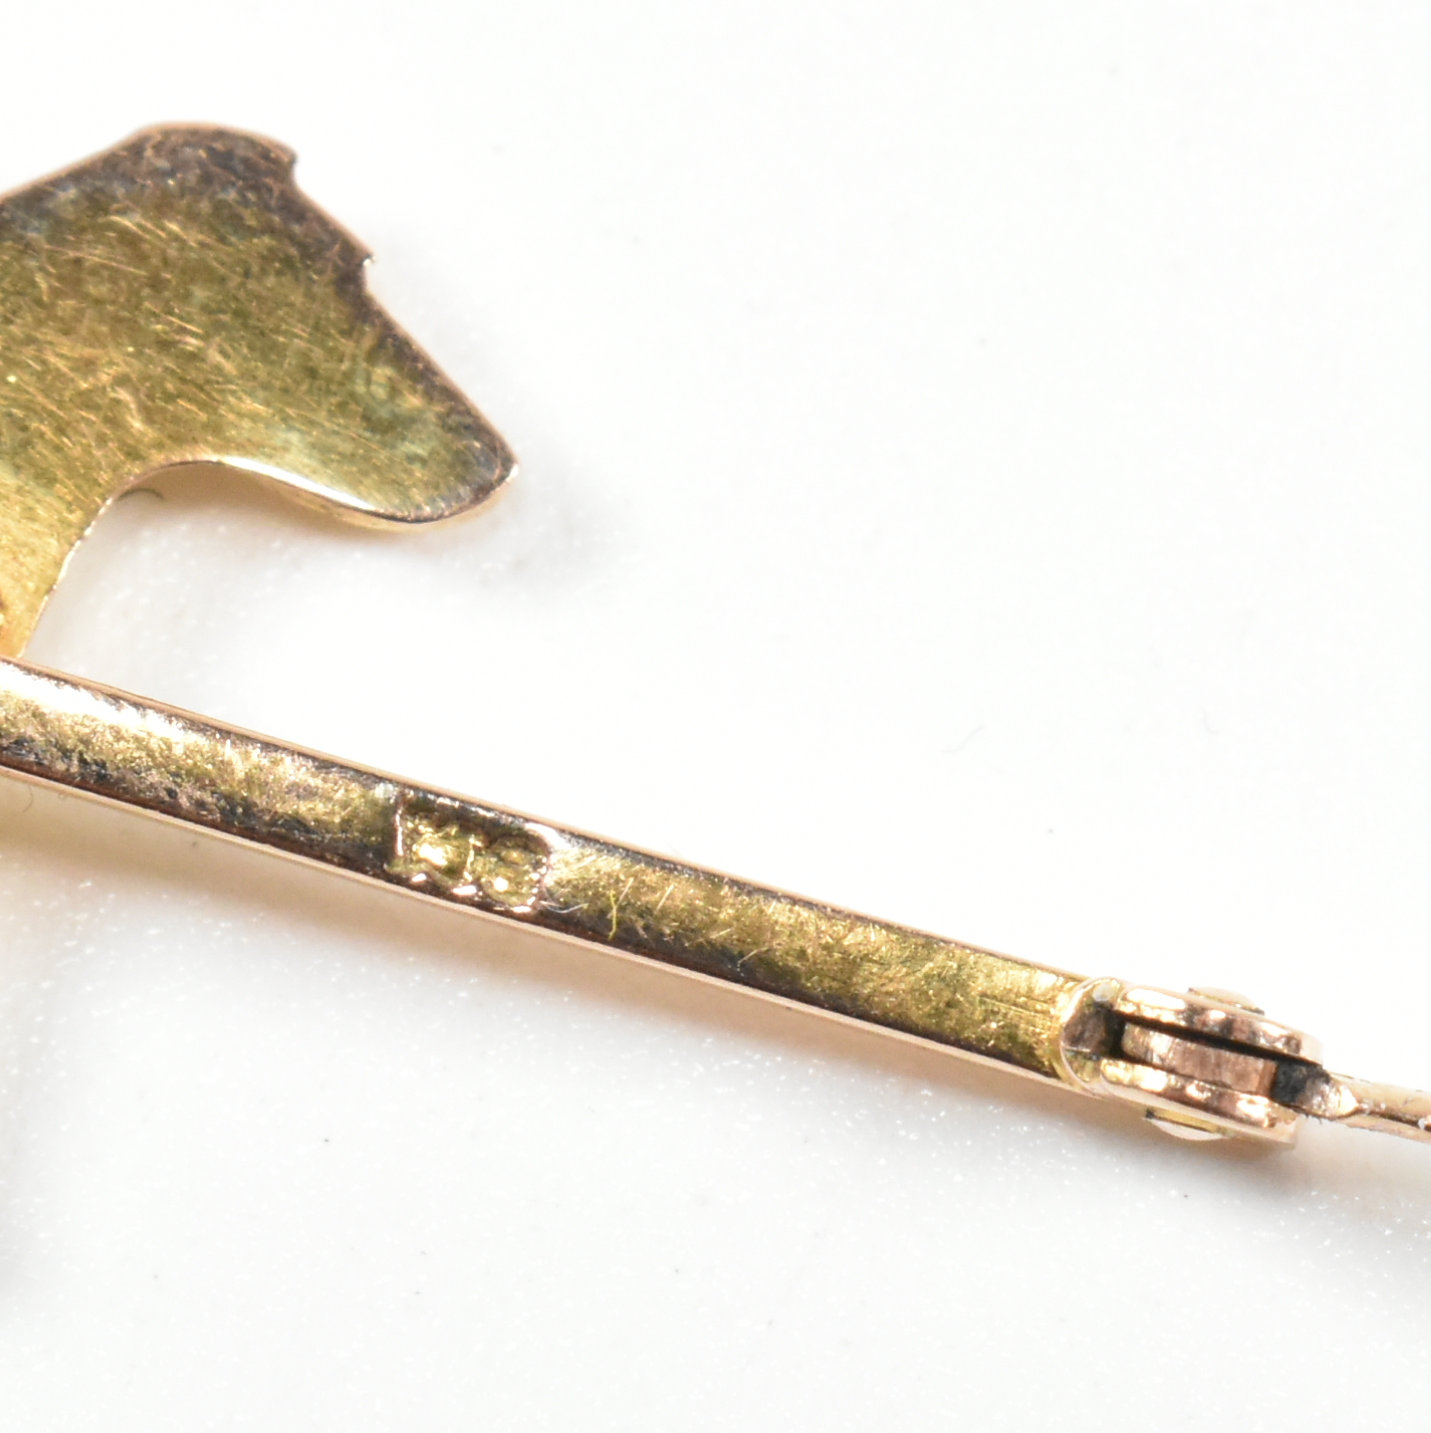 EARLY 20TH CENTURY 9CT GOLD TERRIER DOG BAR BROOCH PIN - Image 6 of 6